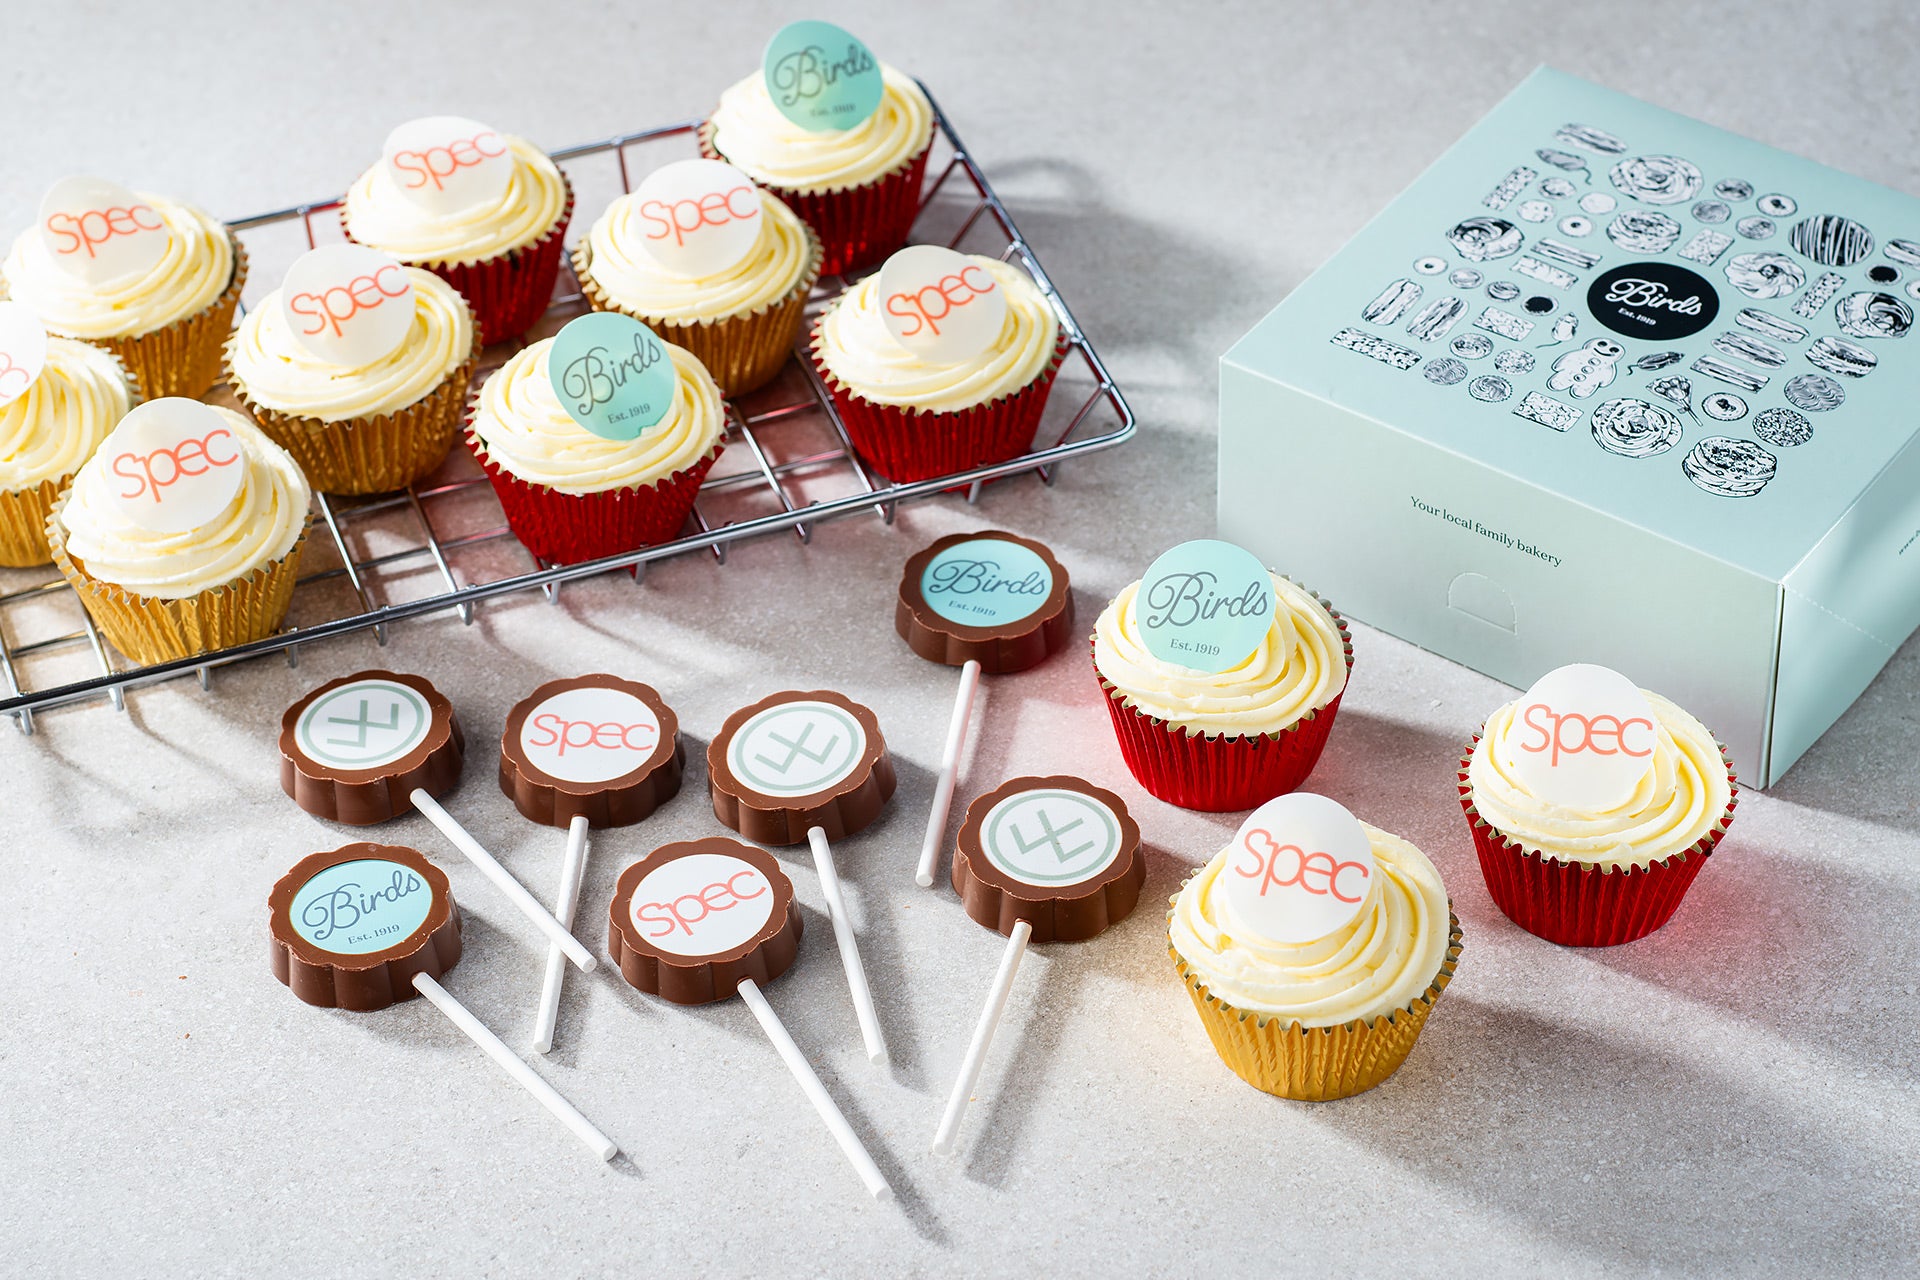 A selection of chocolate lollypops and cupcakes with brand logos